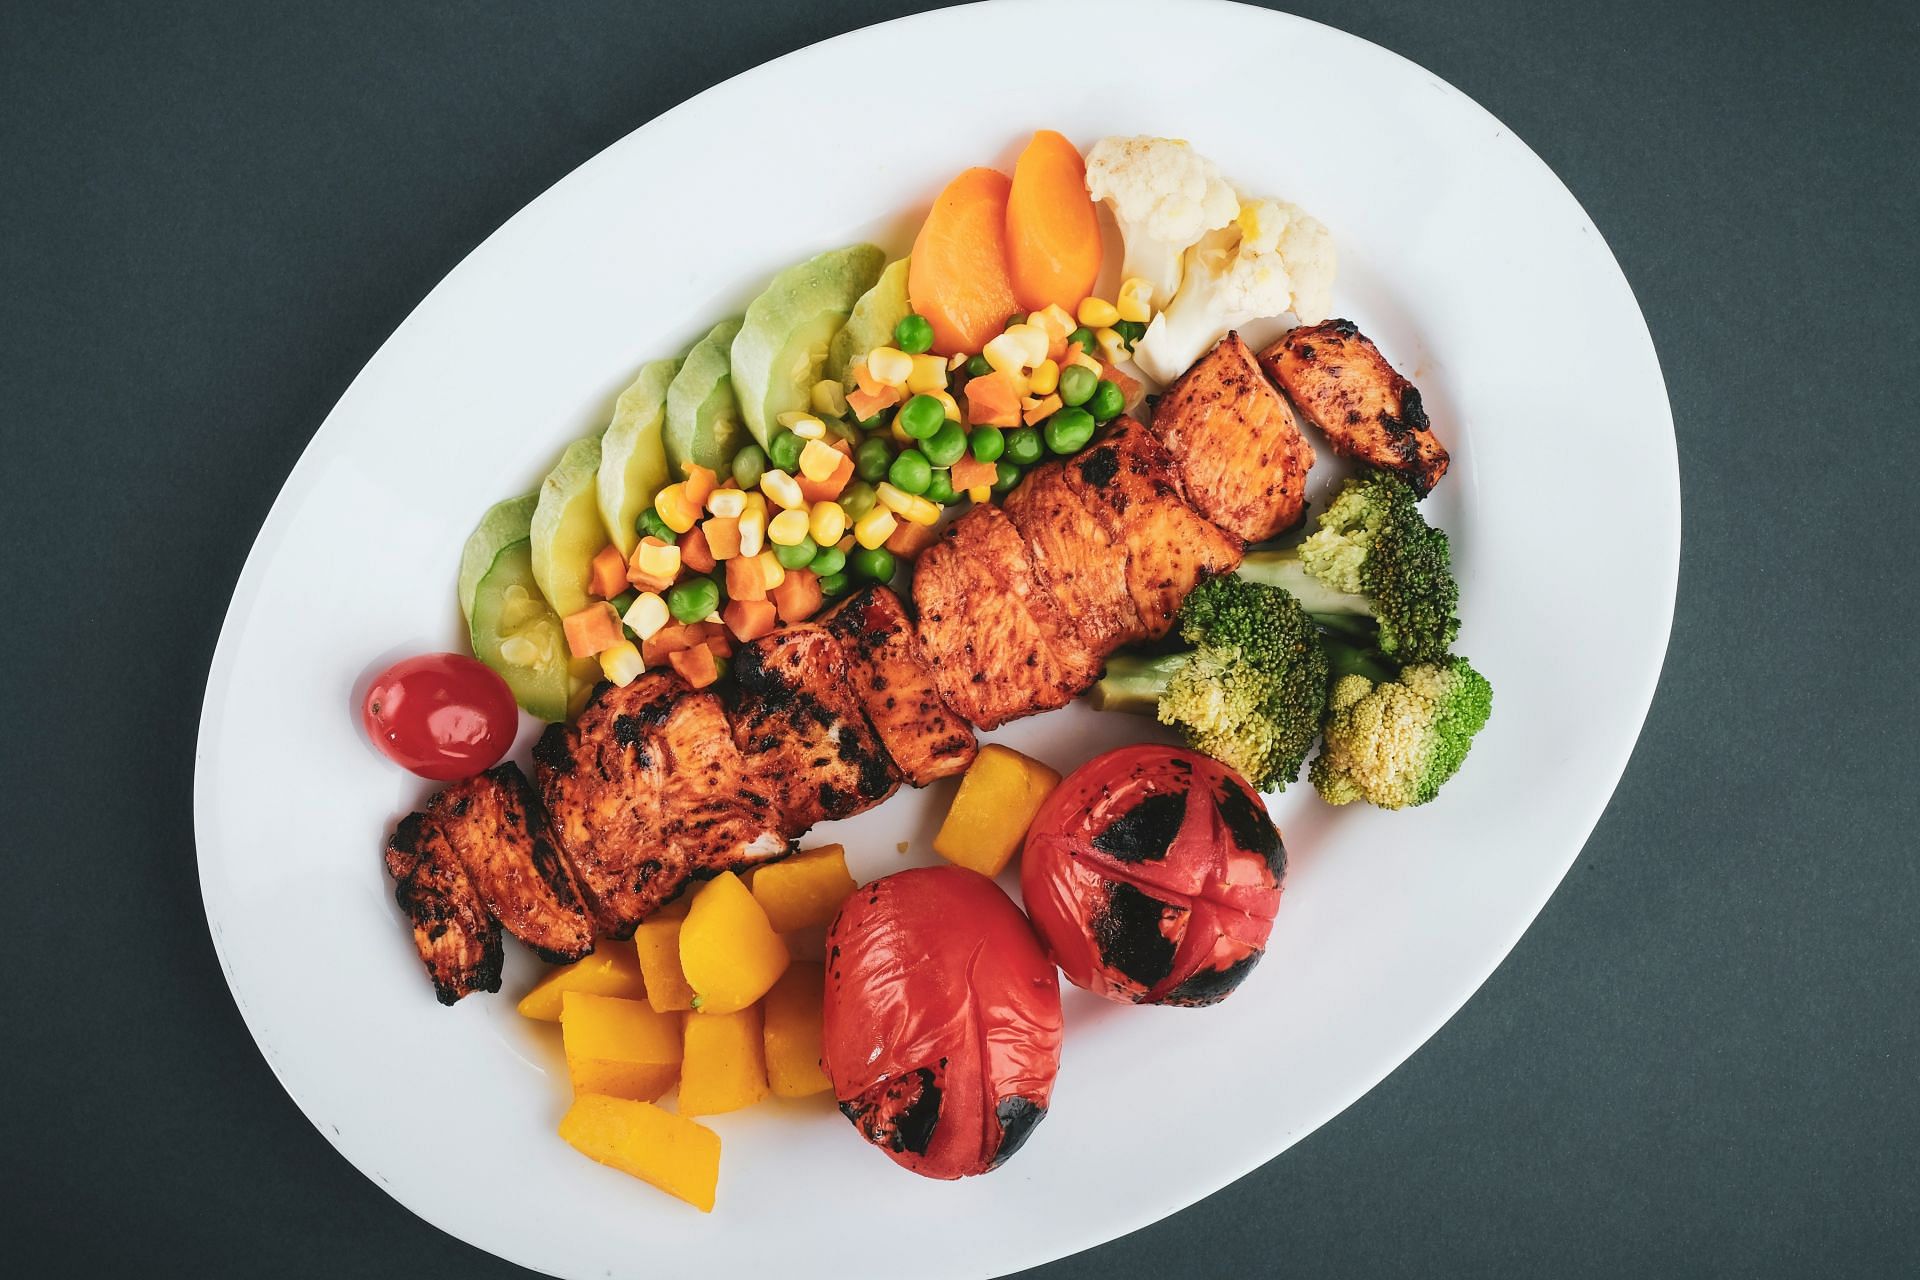 How much carbs, protein, and fat per day to have ? (Image by Sam Moghadam Khamseh/Unsplash)